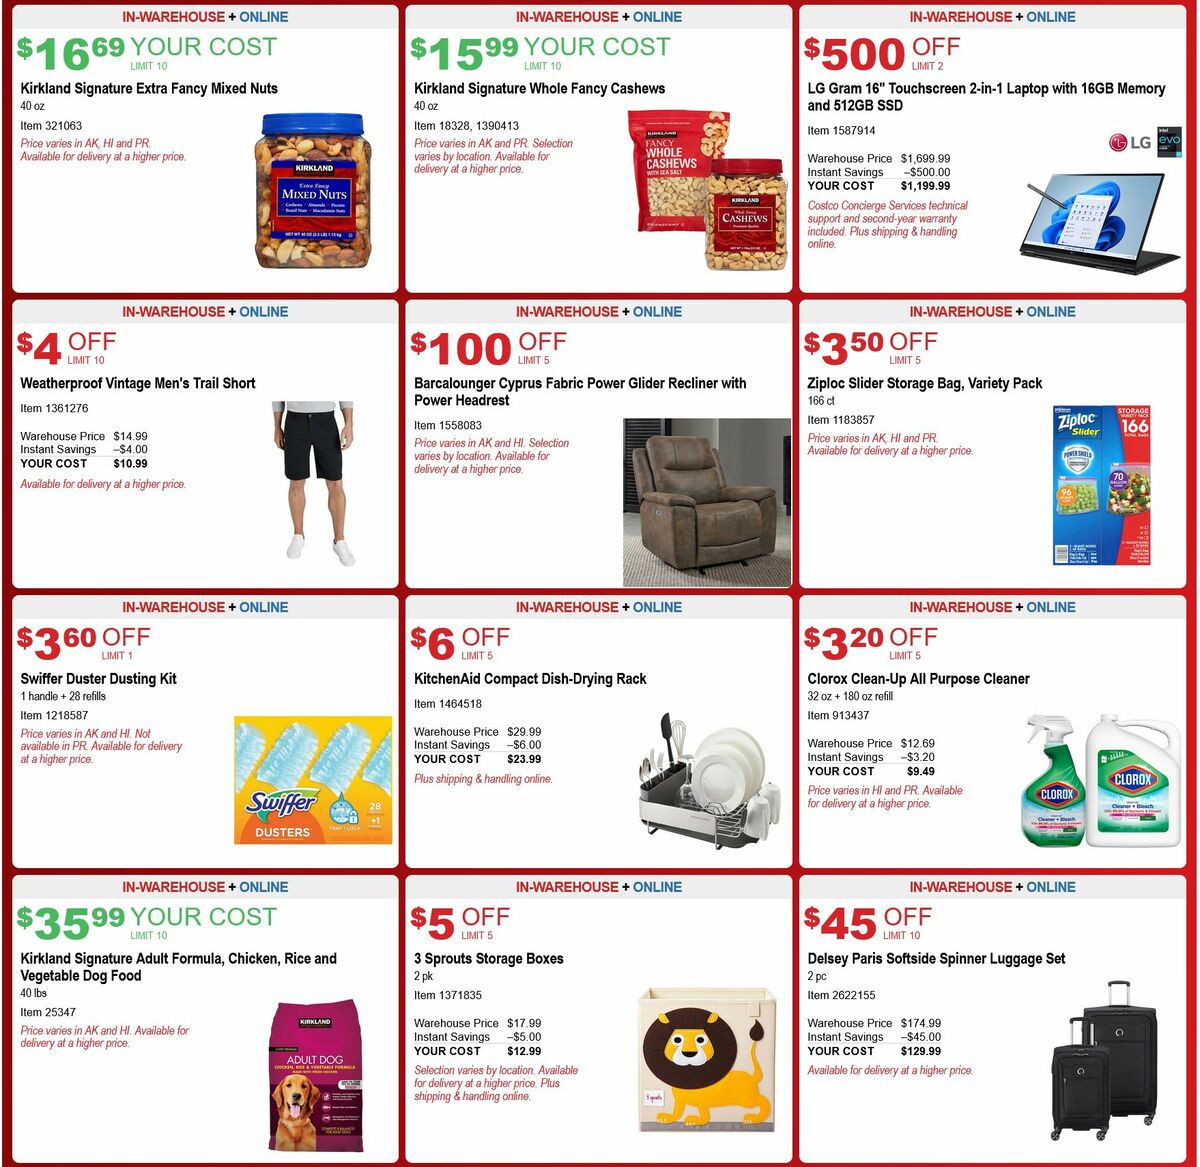 Costco Hot Buys Special Buys and Warehouse Savings from February 26